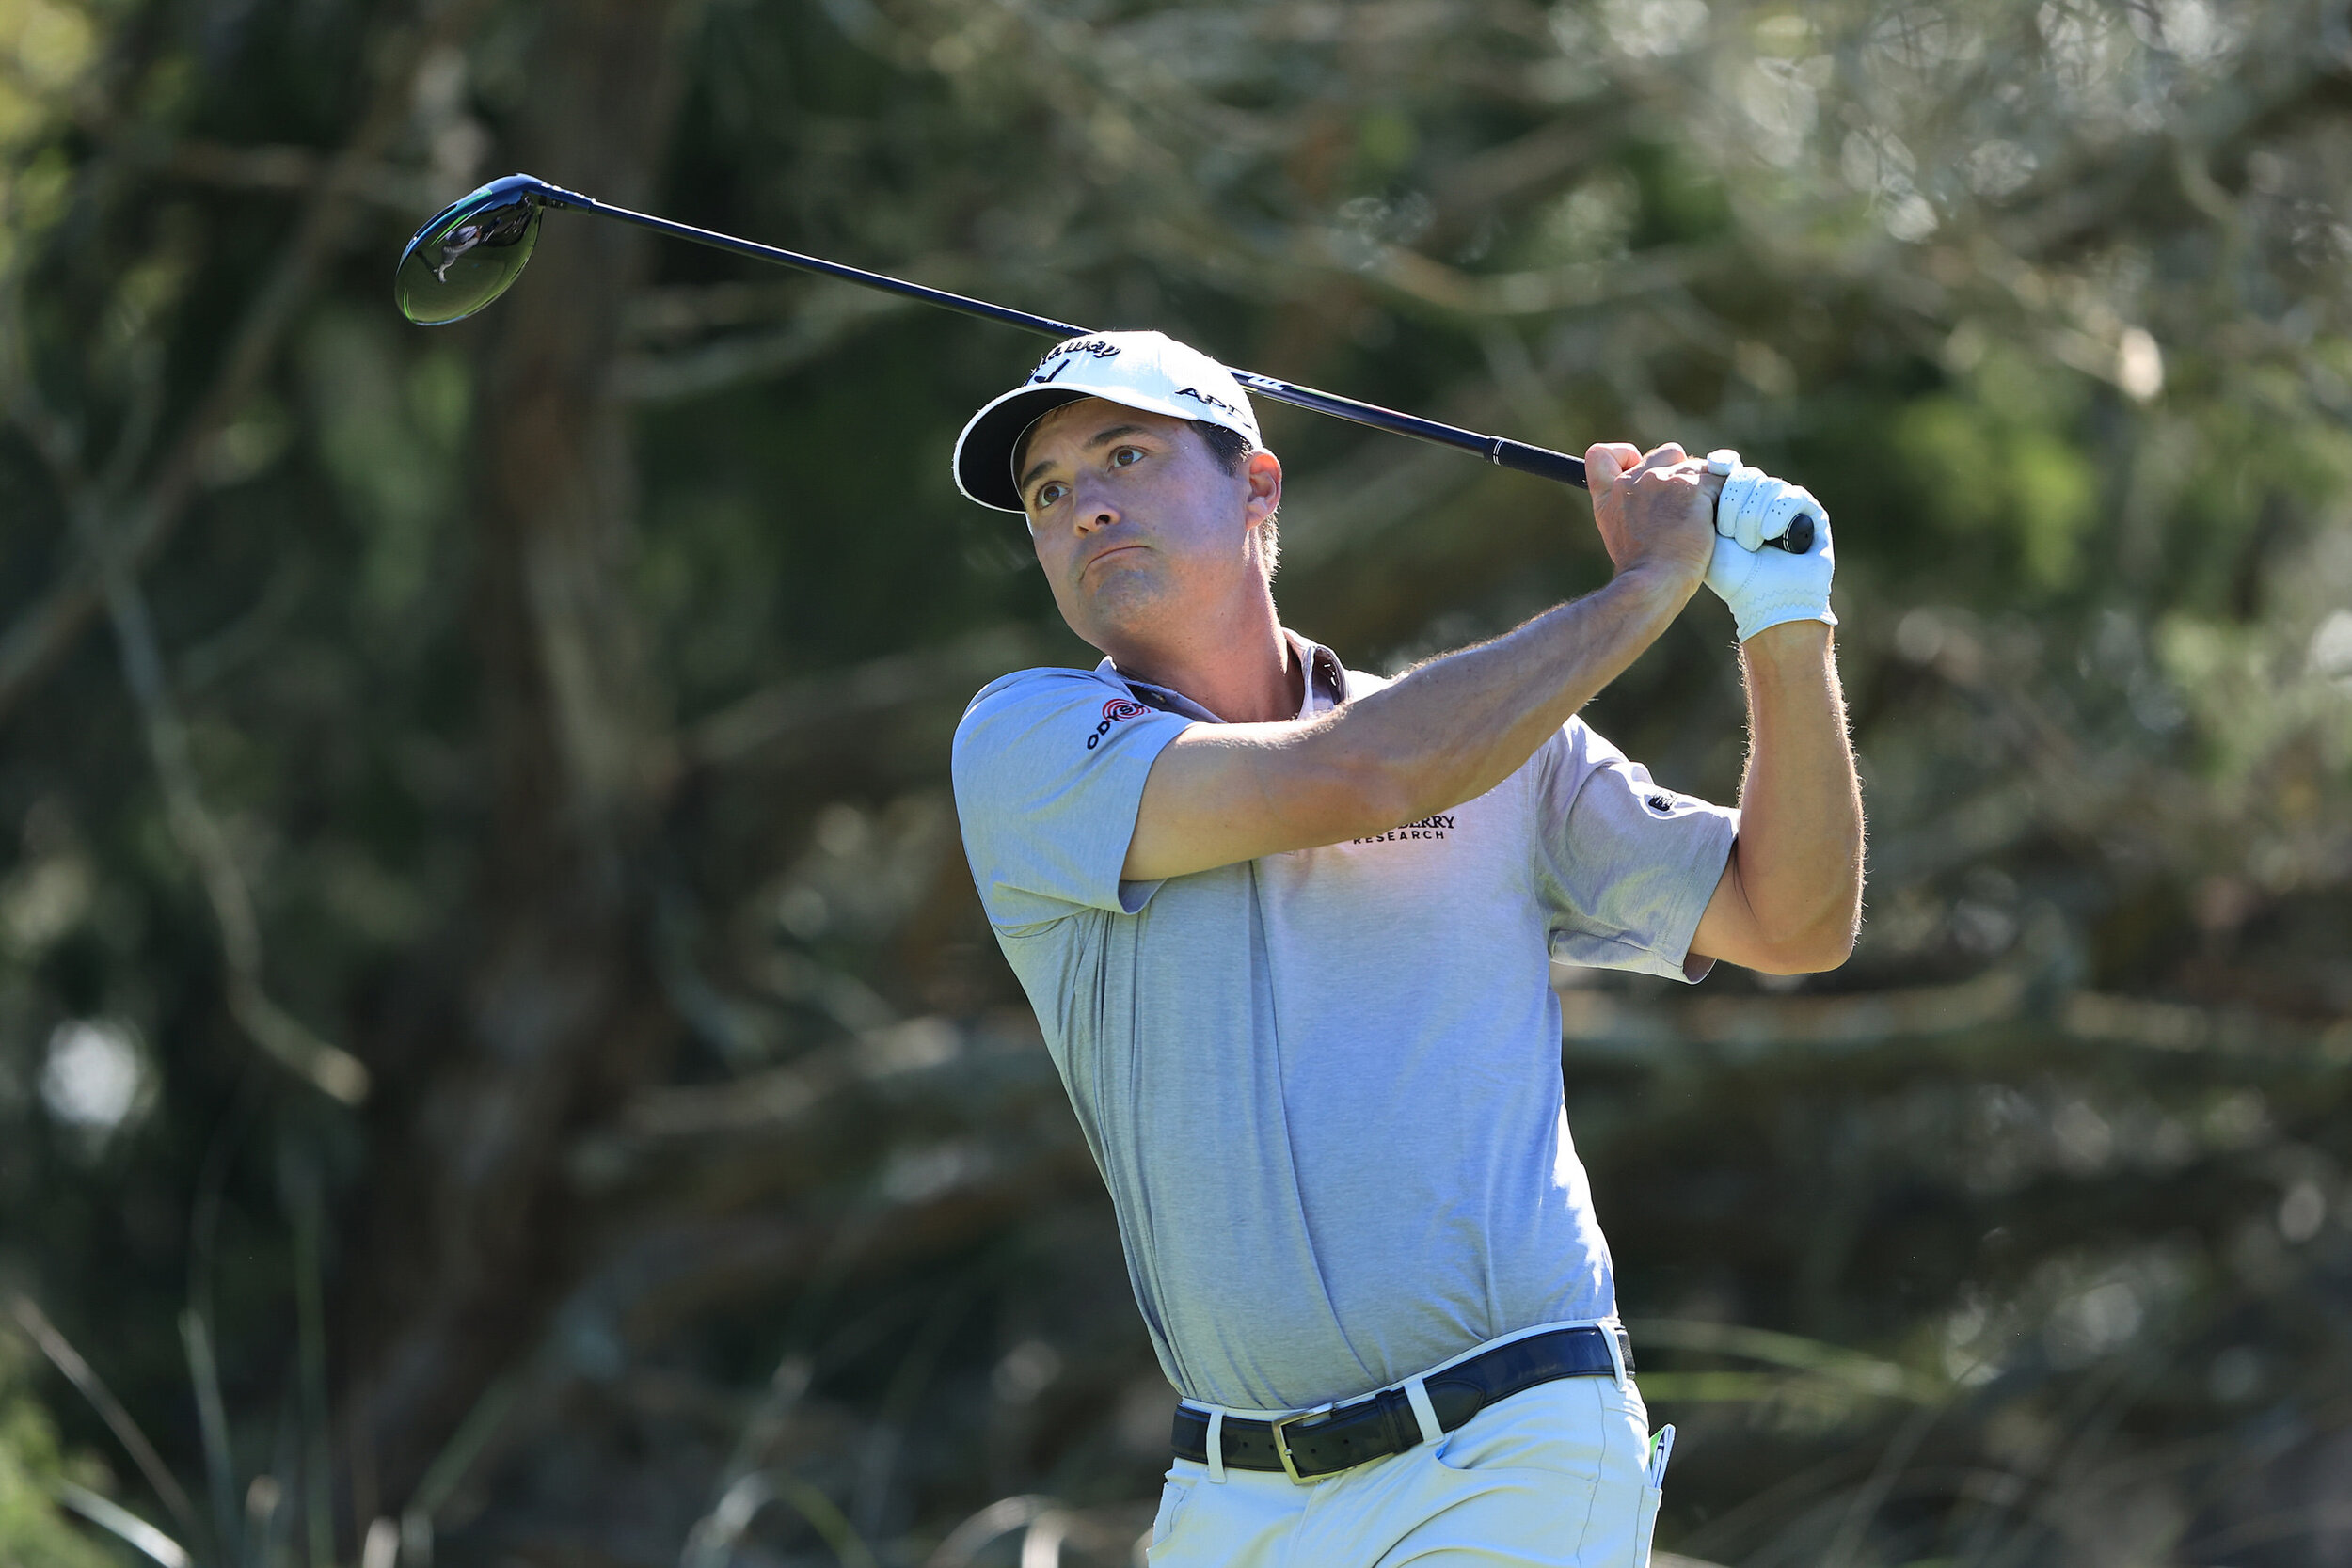  ST SIMONS ISLAND, GEORGIA - NOVEMBER 21: Kevin Kisner of the United States plays his shot from the second tee during the third round of The RSM Classic at the Seaside Course at Sea Island Golf Club on November 21, 2020 in St Simons Island, Georgia. 